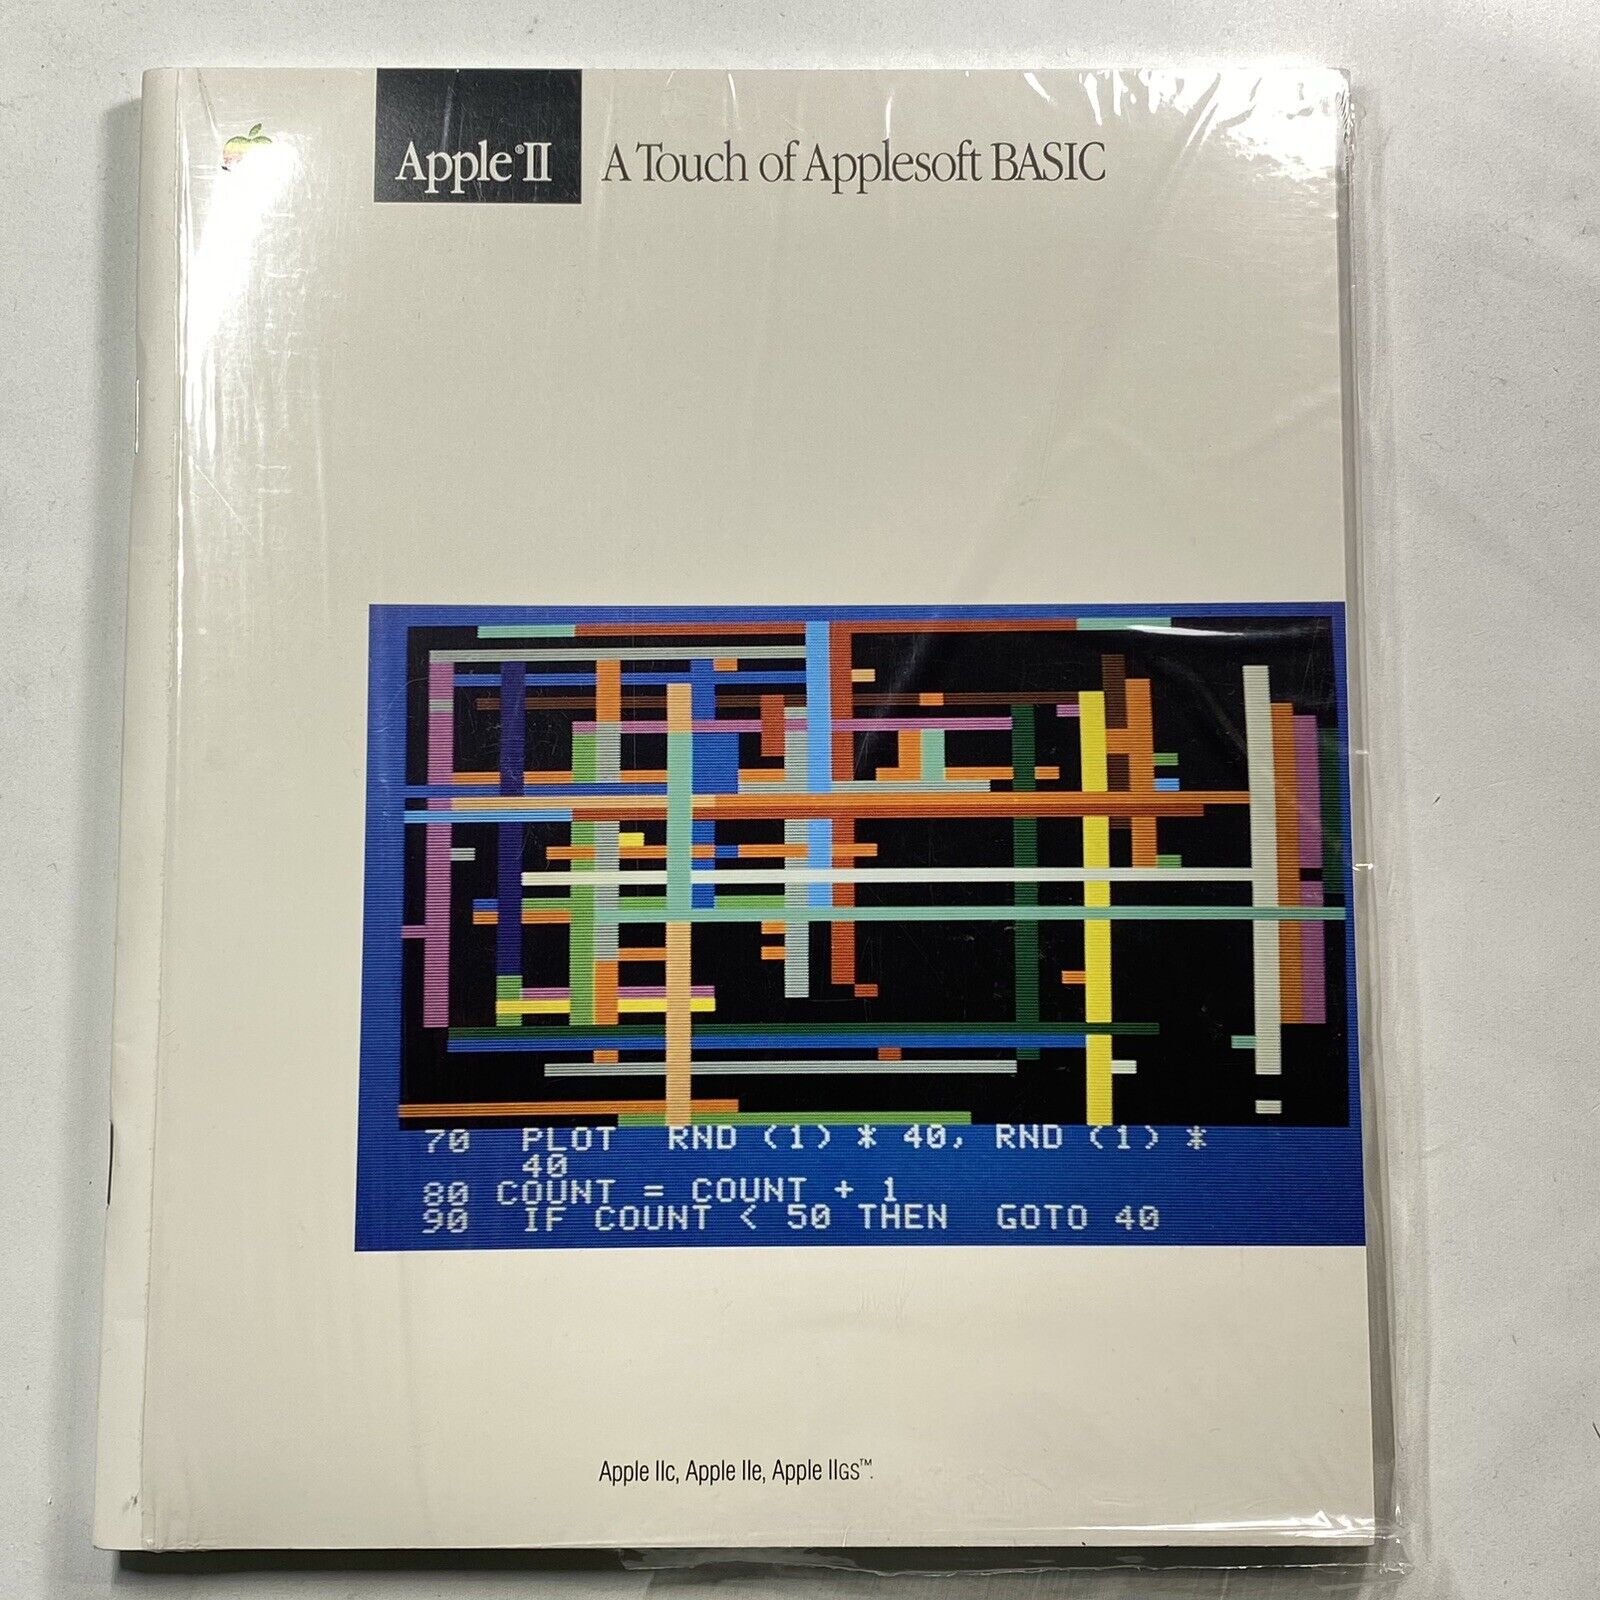 Vintage Apple Manuals: 1986 Apple II A Touch of Applesoft BASIC Factory Sealed